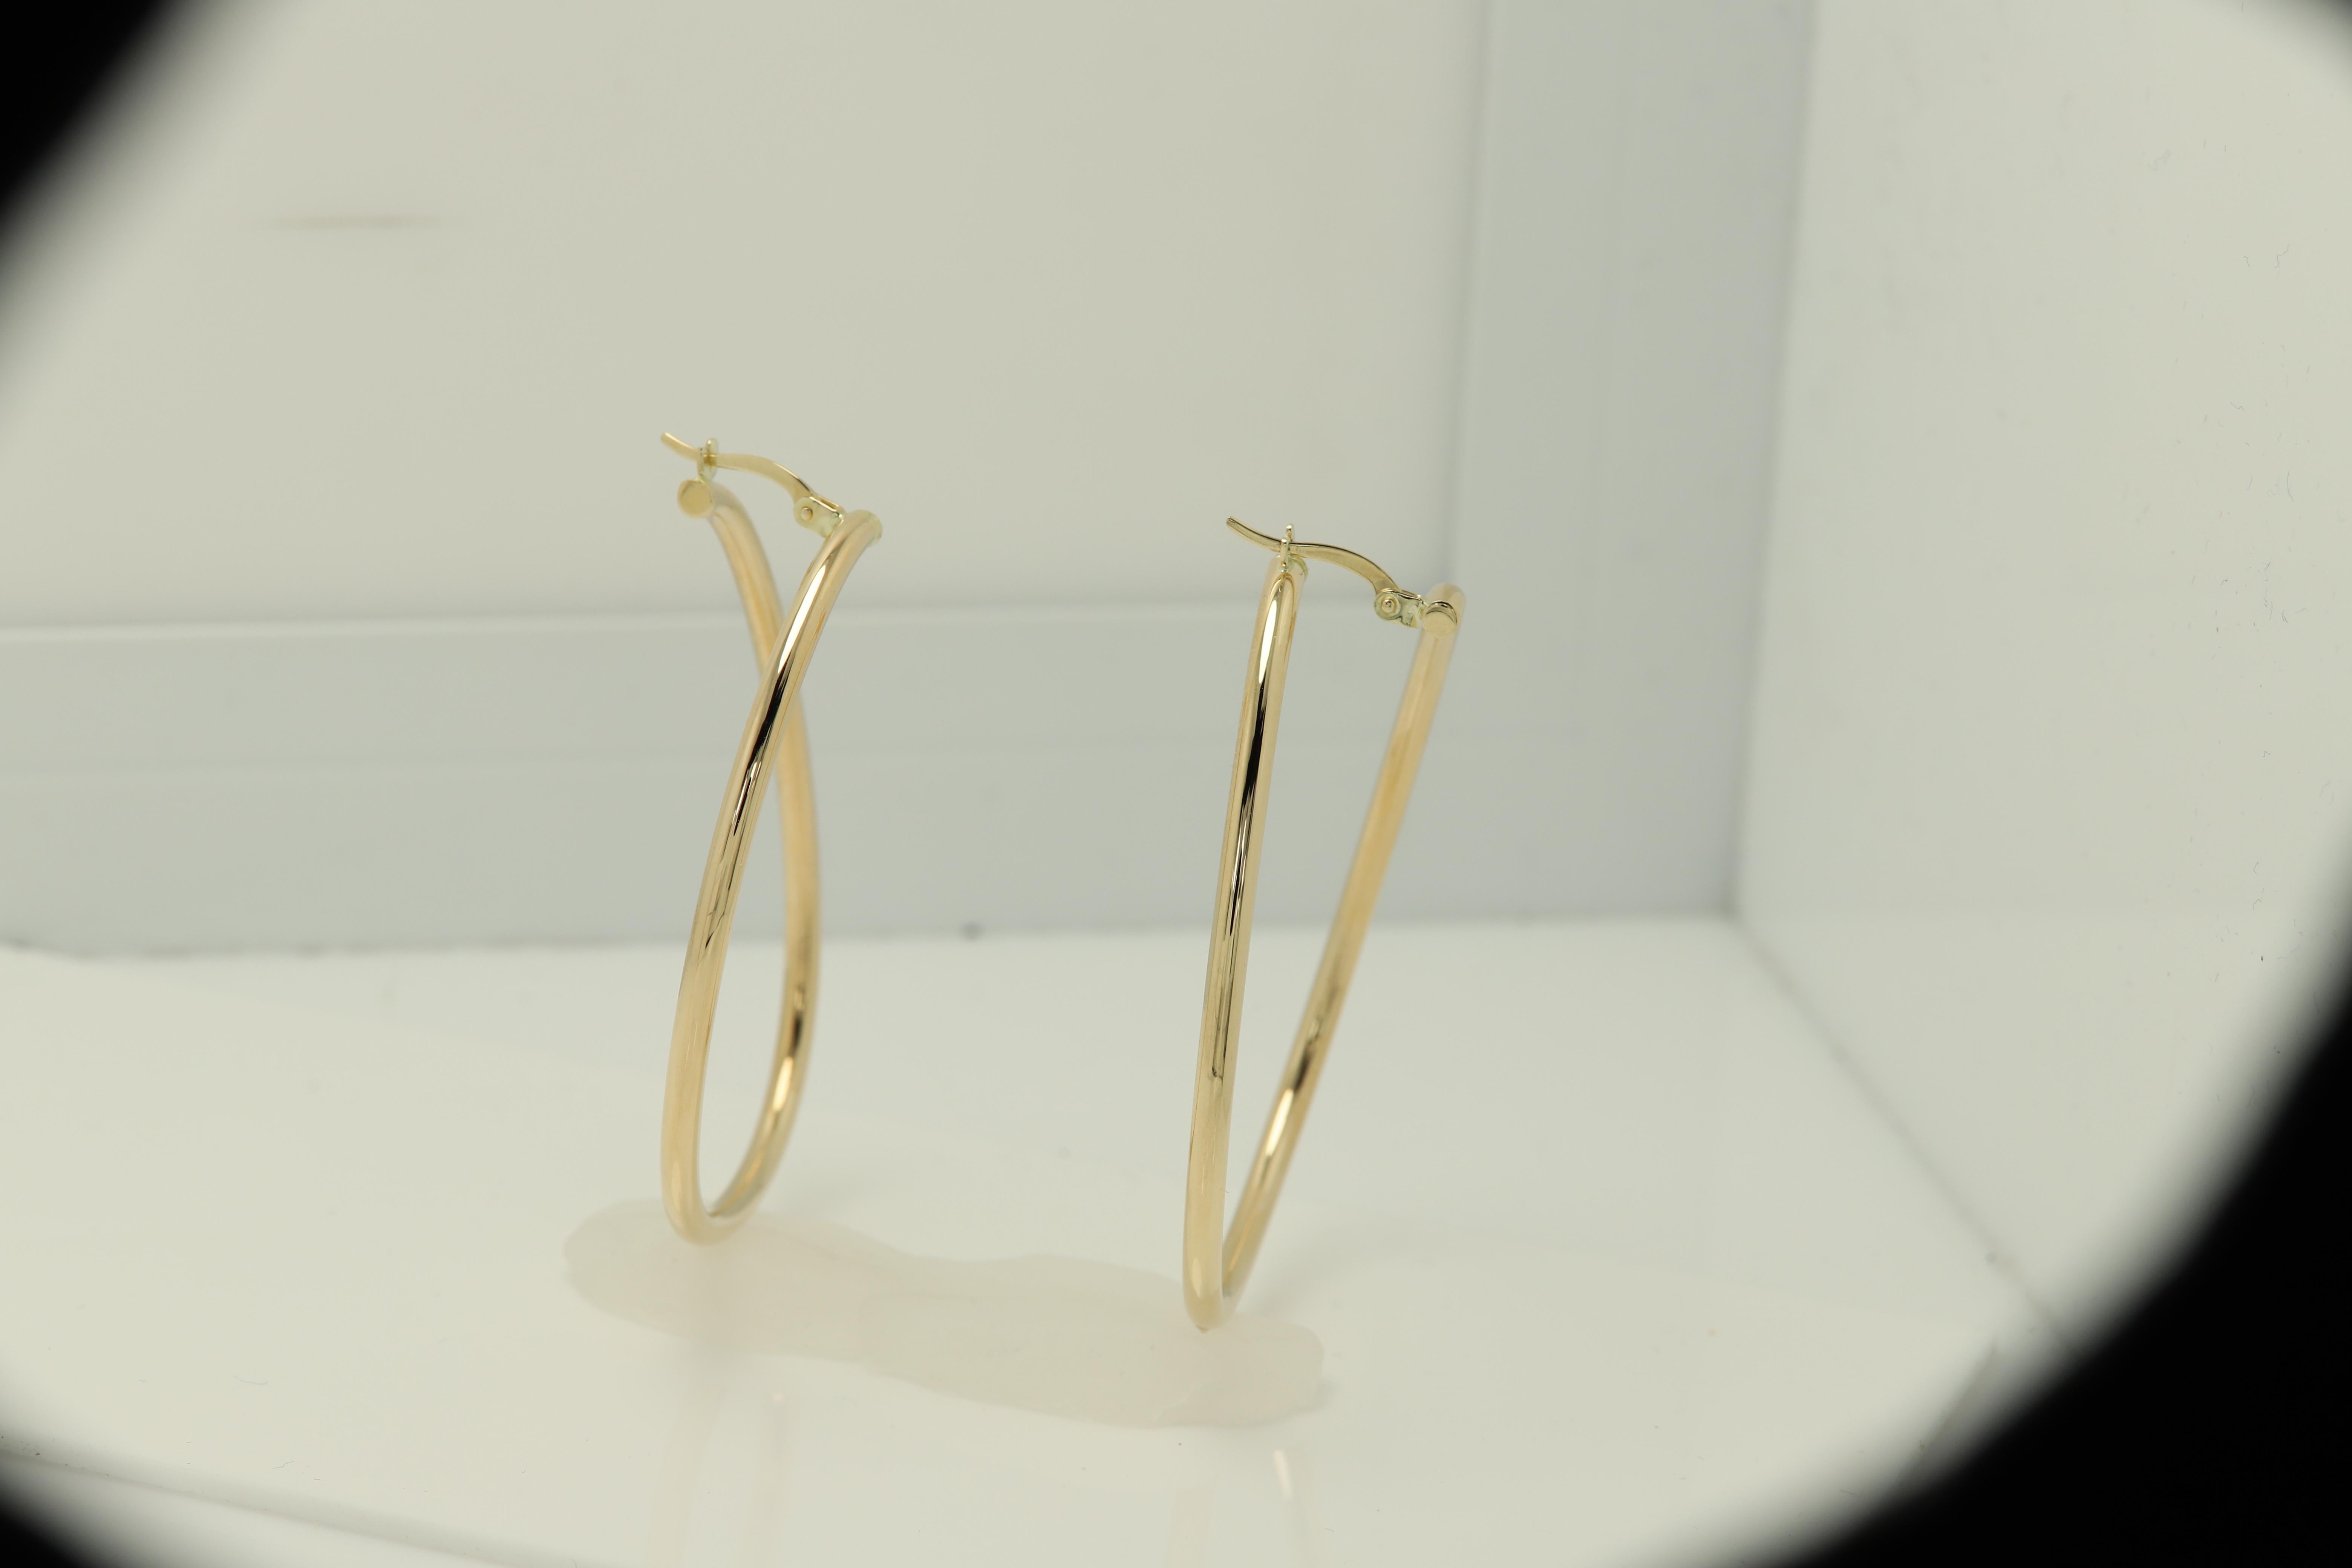 Made in Italy
Popular trendy Gold Hoops 
Semi swirl Shape - modern look.
weight is 3.4 grams total.
14k Yellow Gold.
approx size: 2' Inch long x 1.5' inch 
Standard Latch Back.
+Gift Box
(#3.4gr)